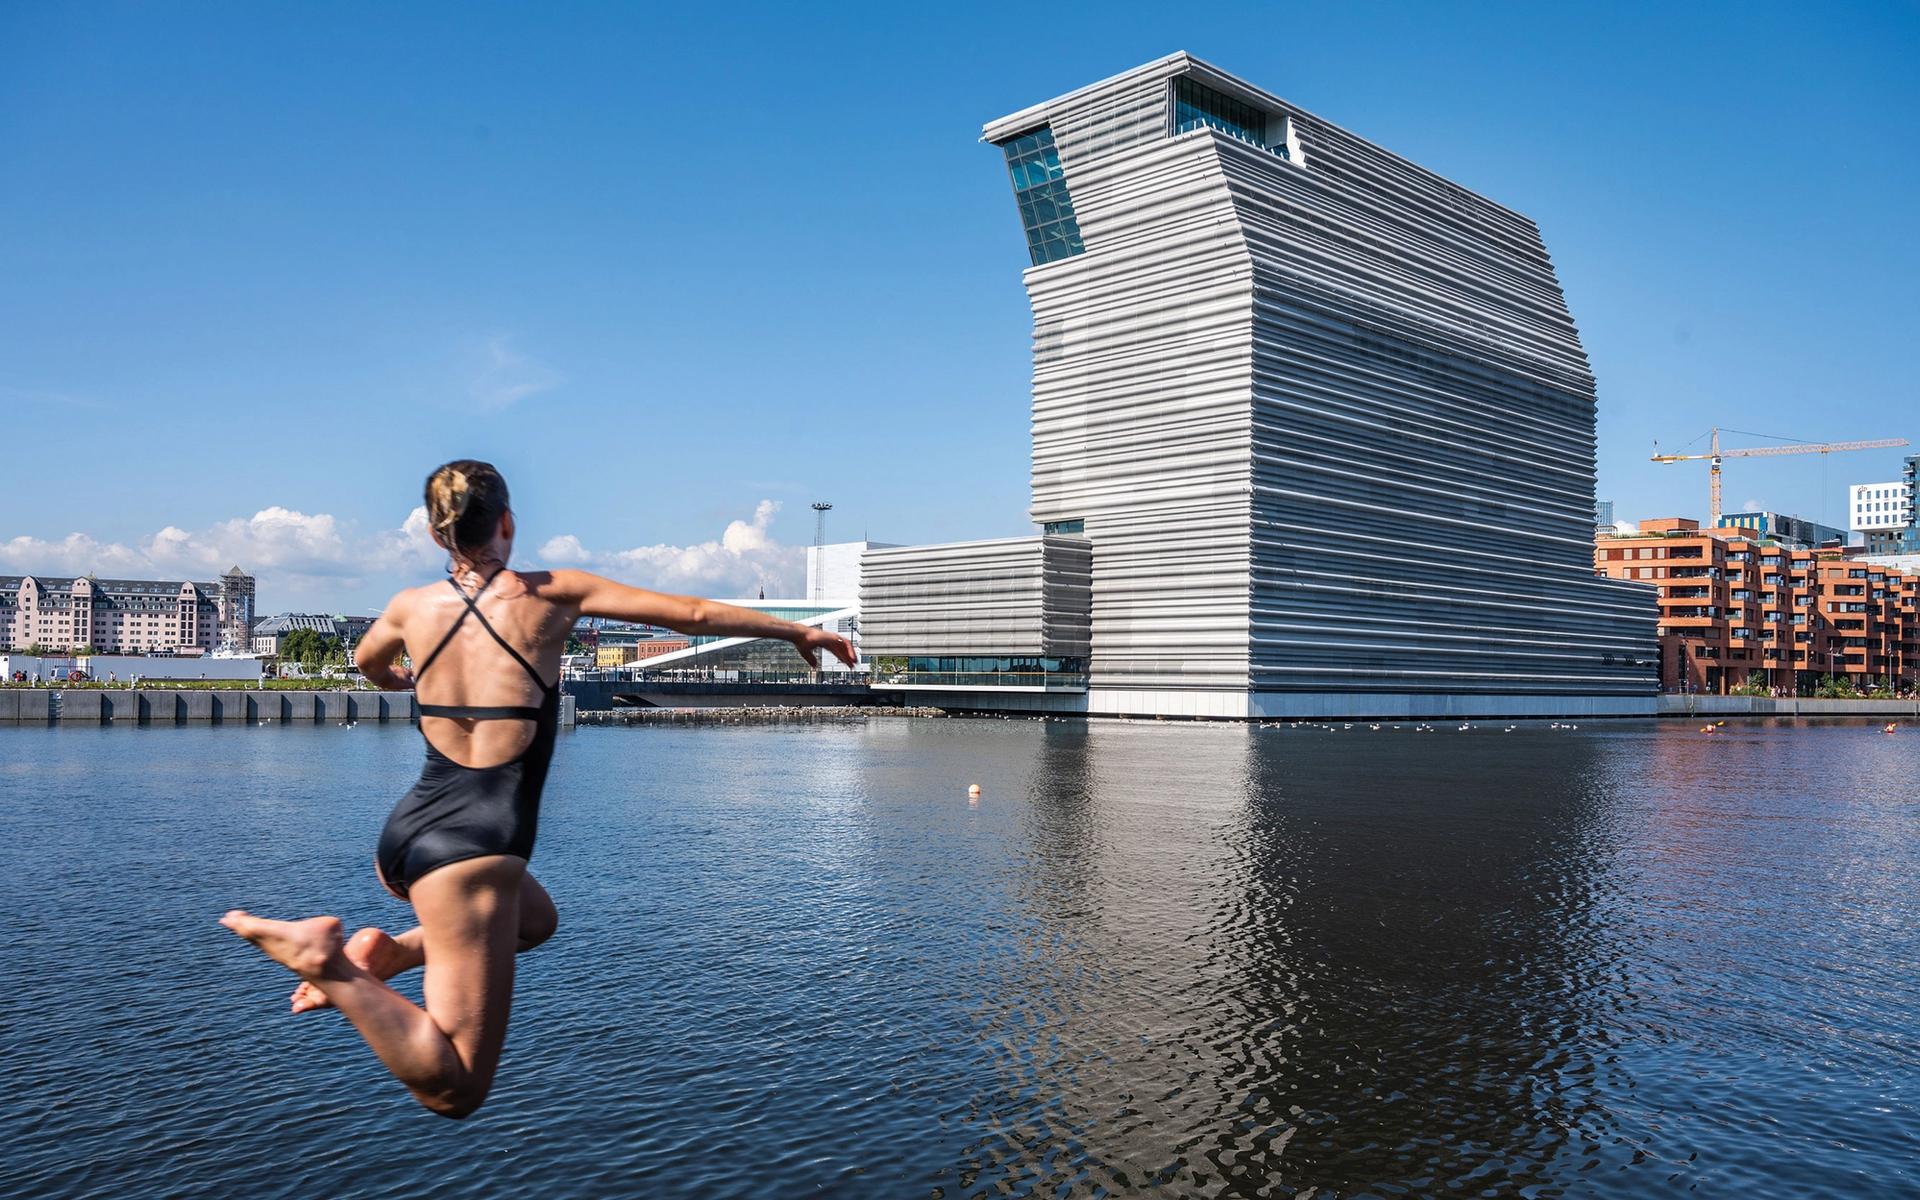 The new museum sits on Oslo’s bay of Bjorvika and promises sweeping views of the city. The waterfront location proved a magnet for swimmers this summer © Guttorm Stilen Johansen